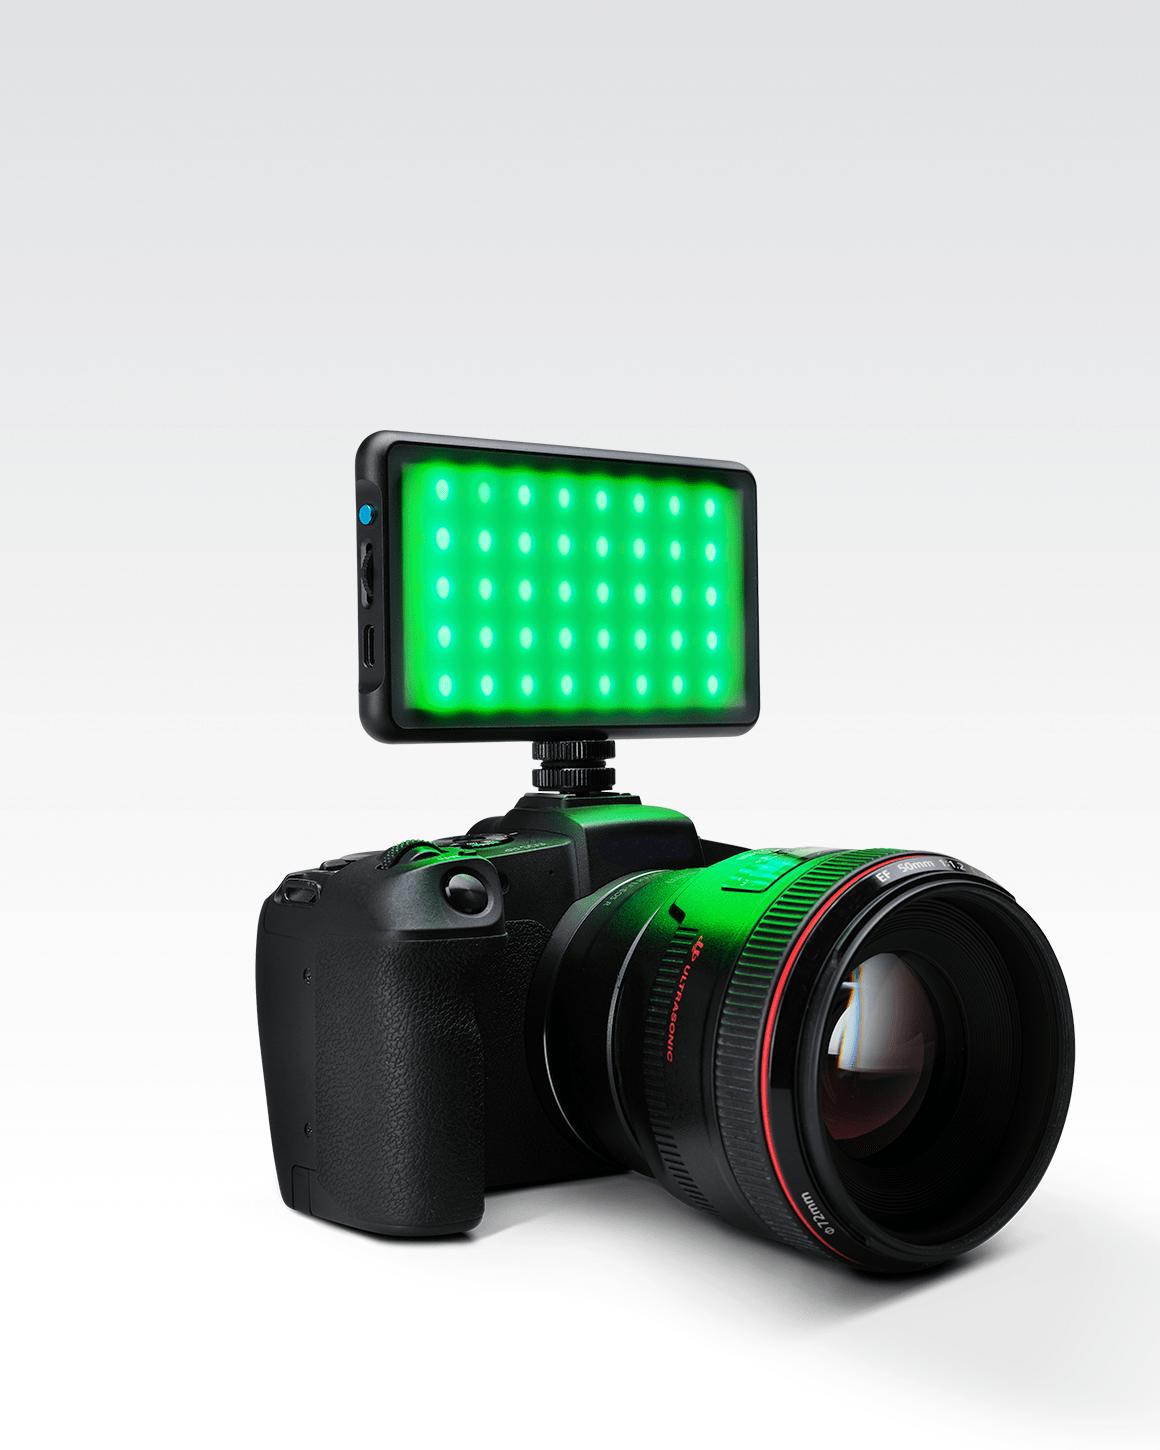 Lume Cube RGB Panel Go mounted on Sony camera with Green LEDs glowing.